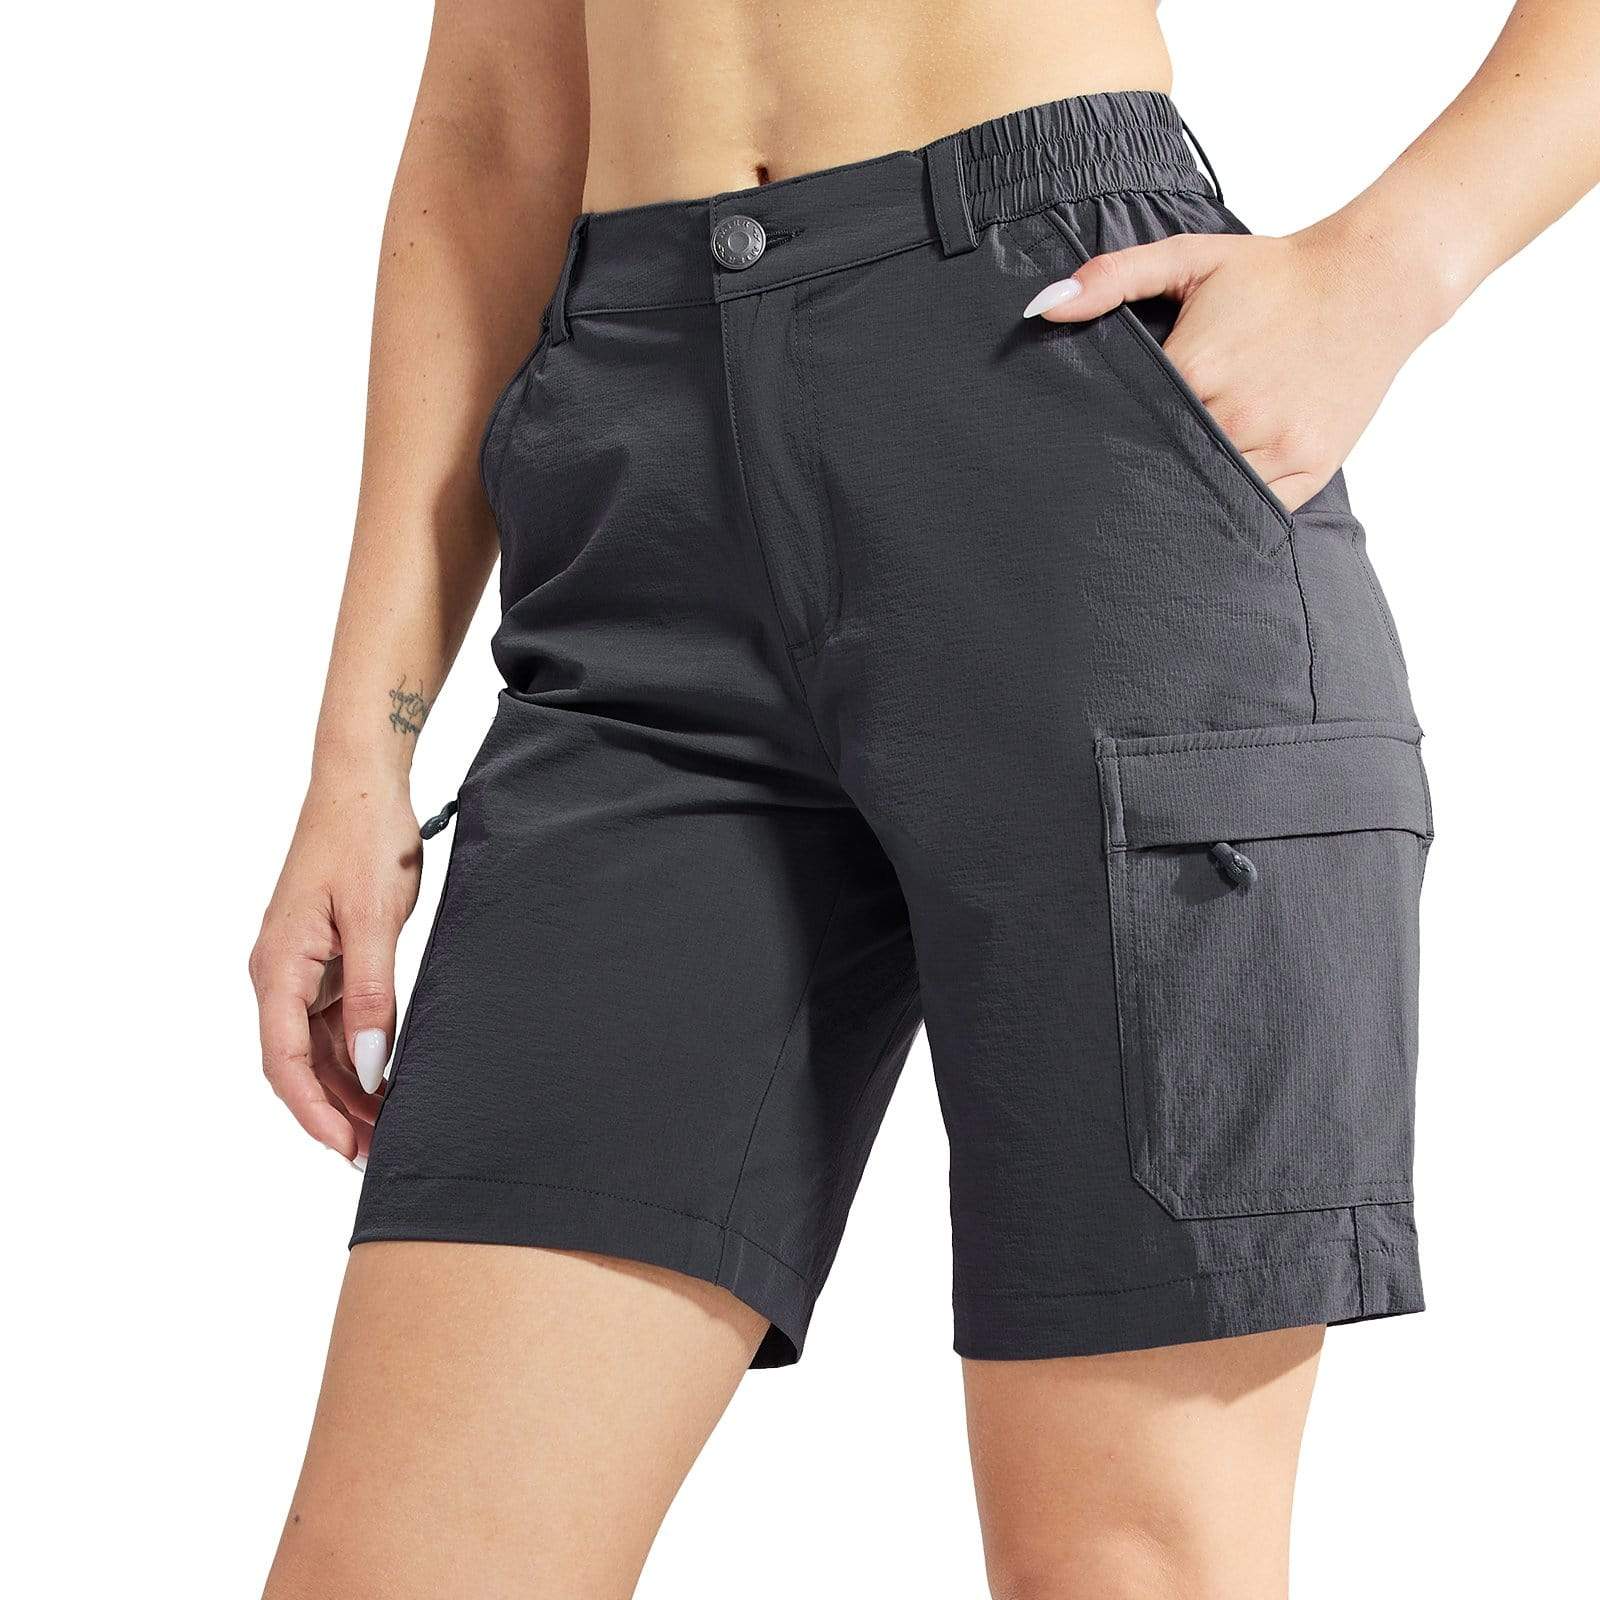 Mier Women's Stretchy Hiking Shorts Quick Dry Cargo Shorts, Graphite Grey / 10